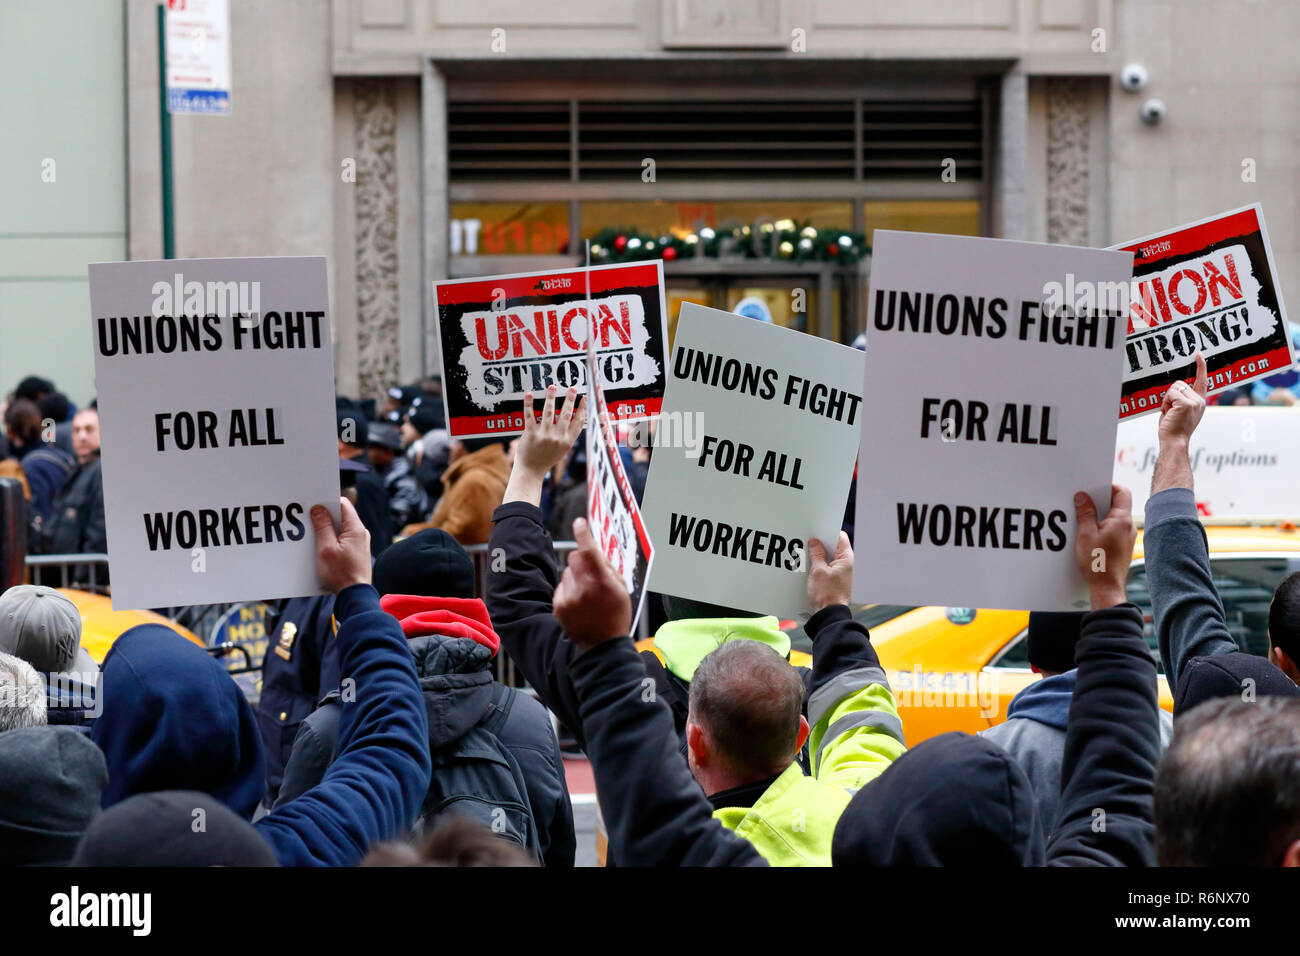 A union labor rally/protest outside Charter Spectrum cable company in New York City (December 5, 2018) Stock Photo